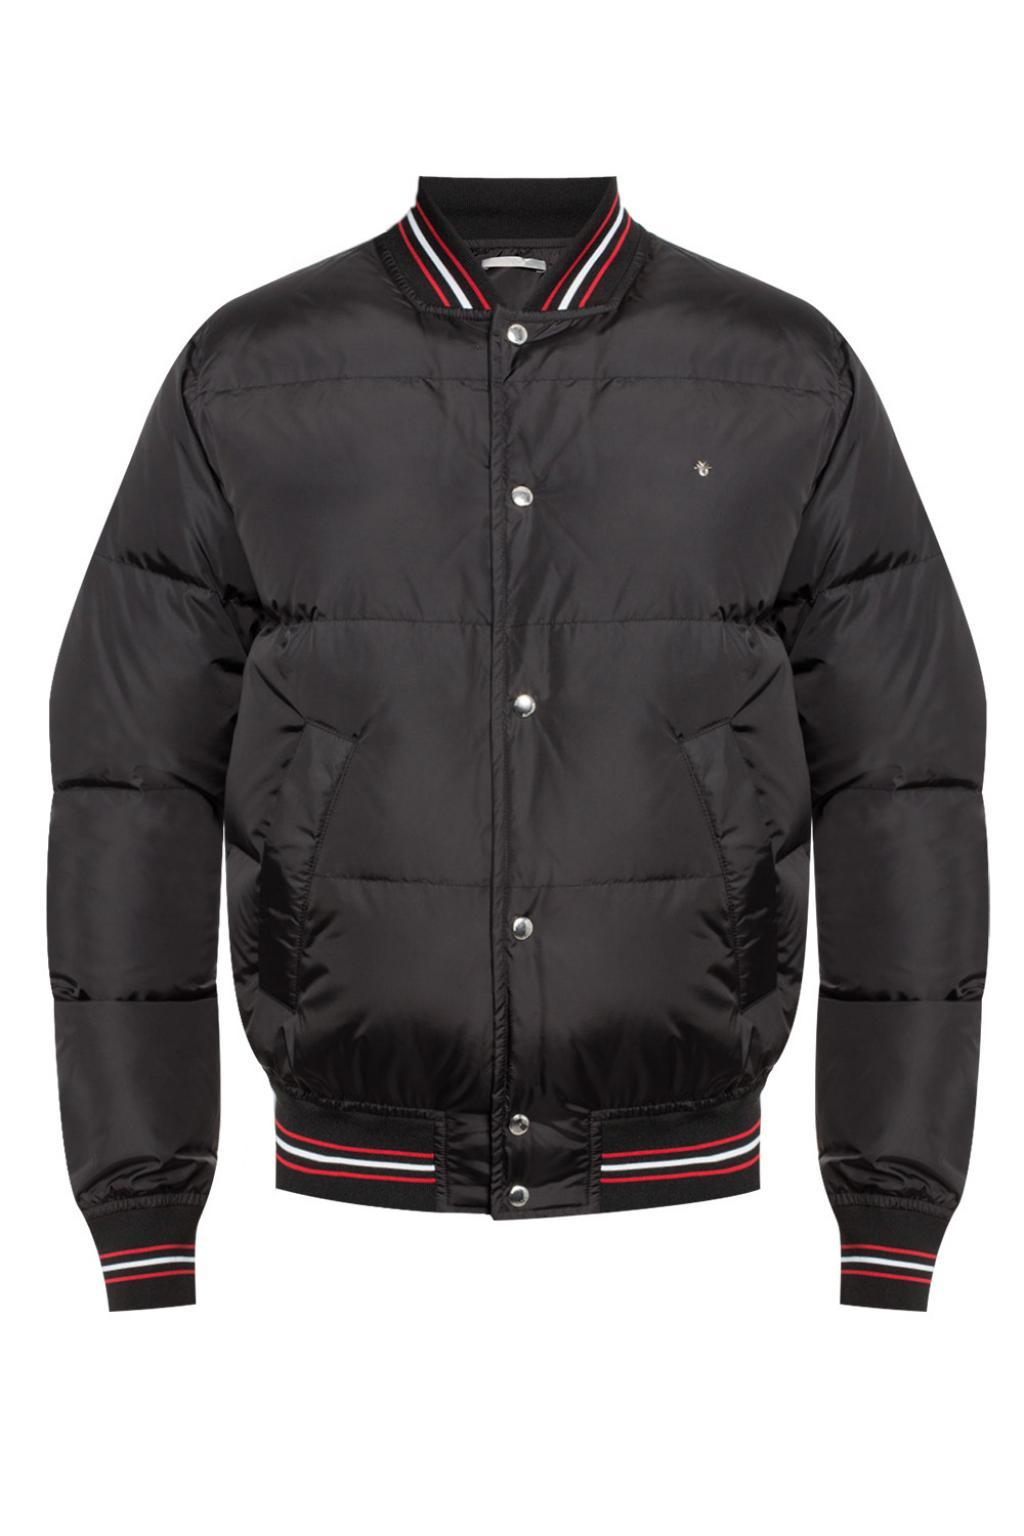 Dior Synthetic Quilted Down Jacket in Black for Men - Lyst